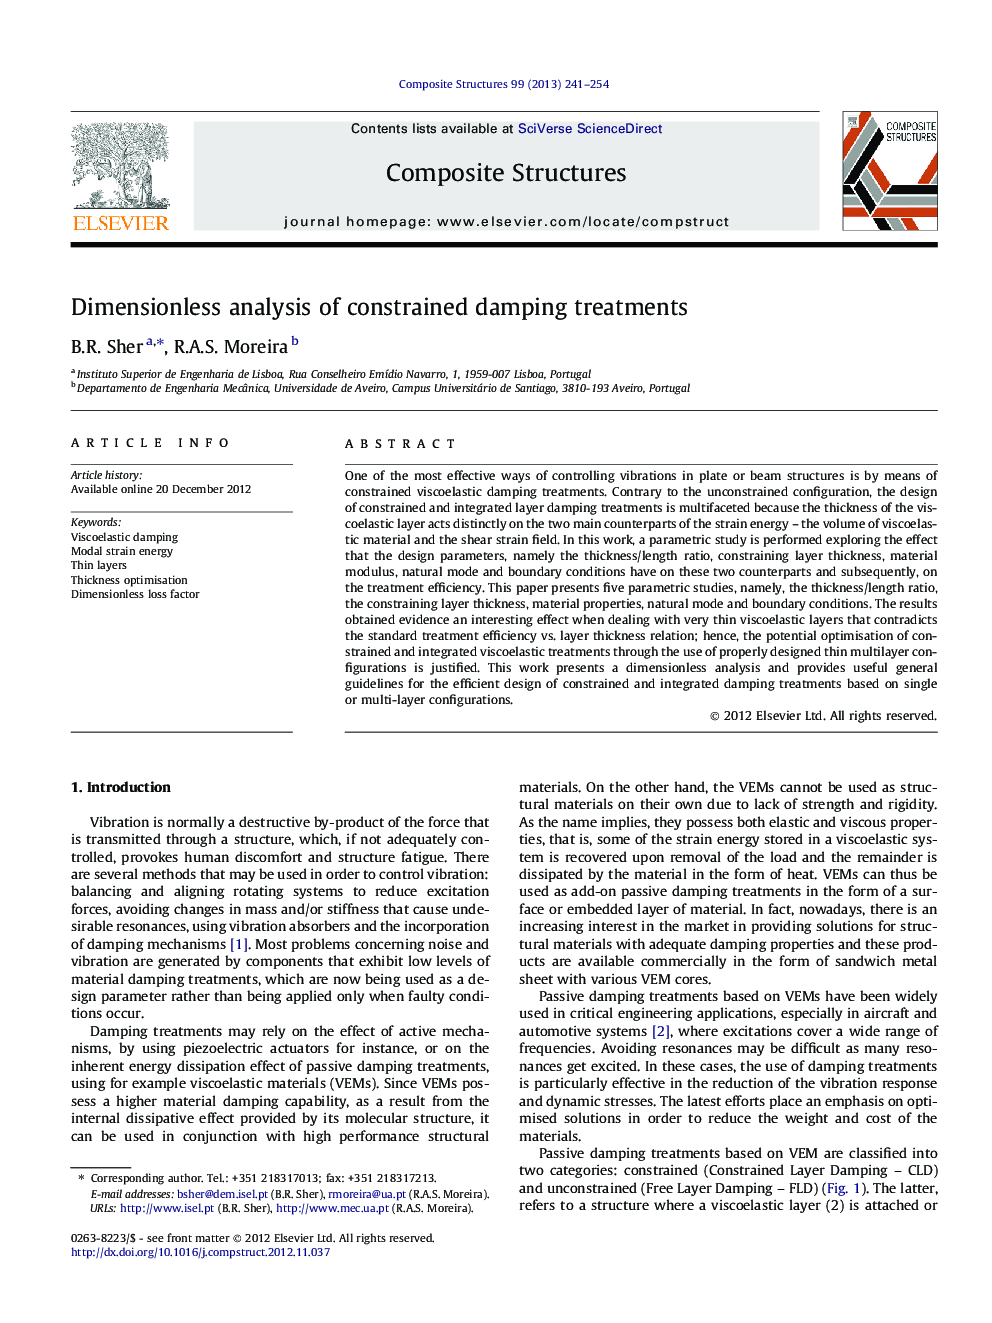 Dimensionless analysis of constrained damping treatments